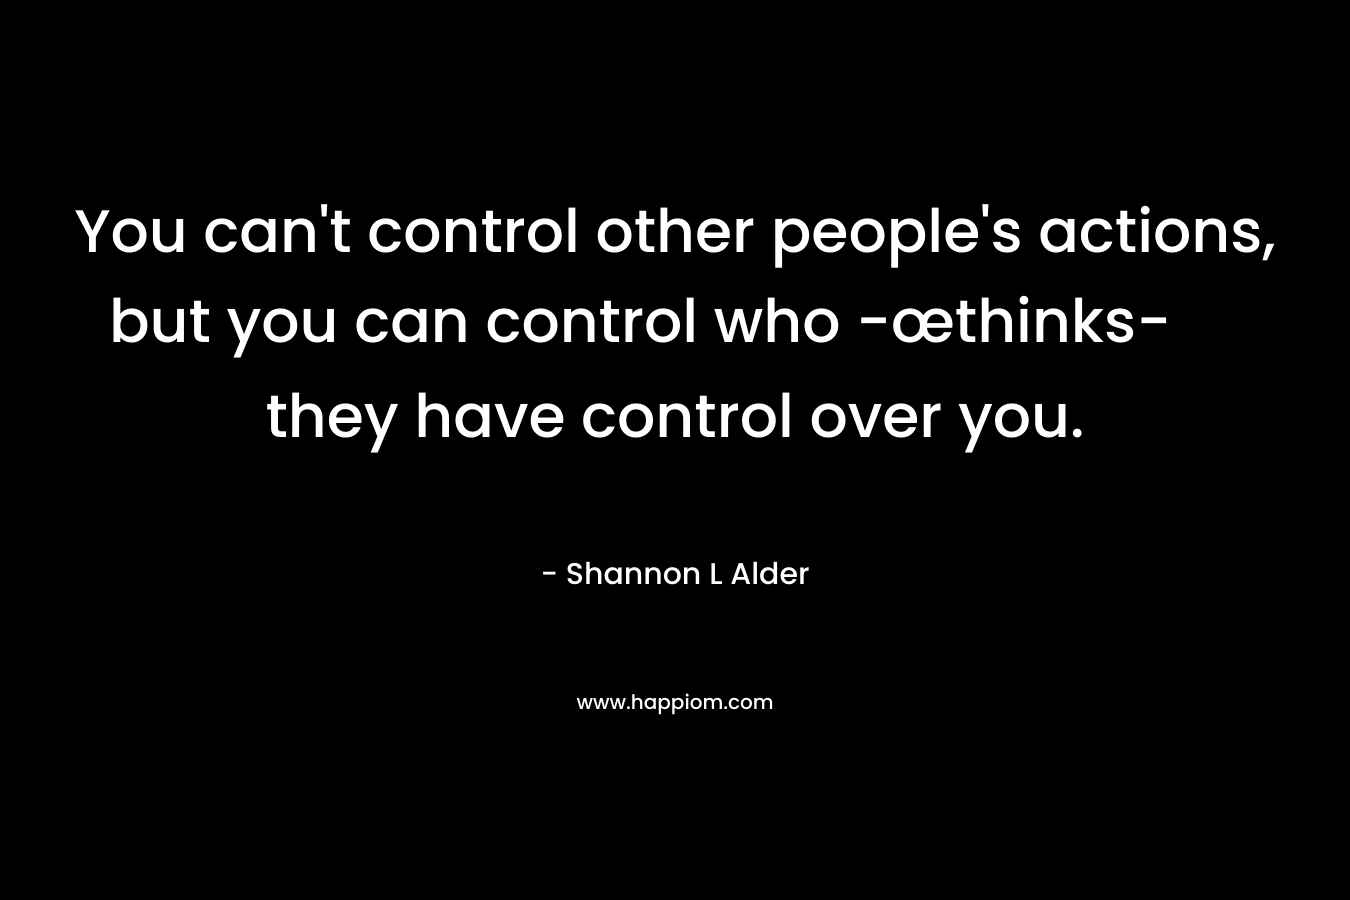 You can't control other people's actions, but you can control who -œthinks- they have control over you.